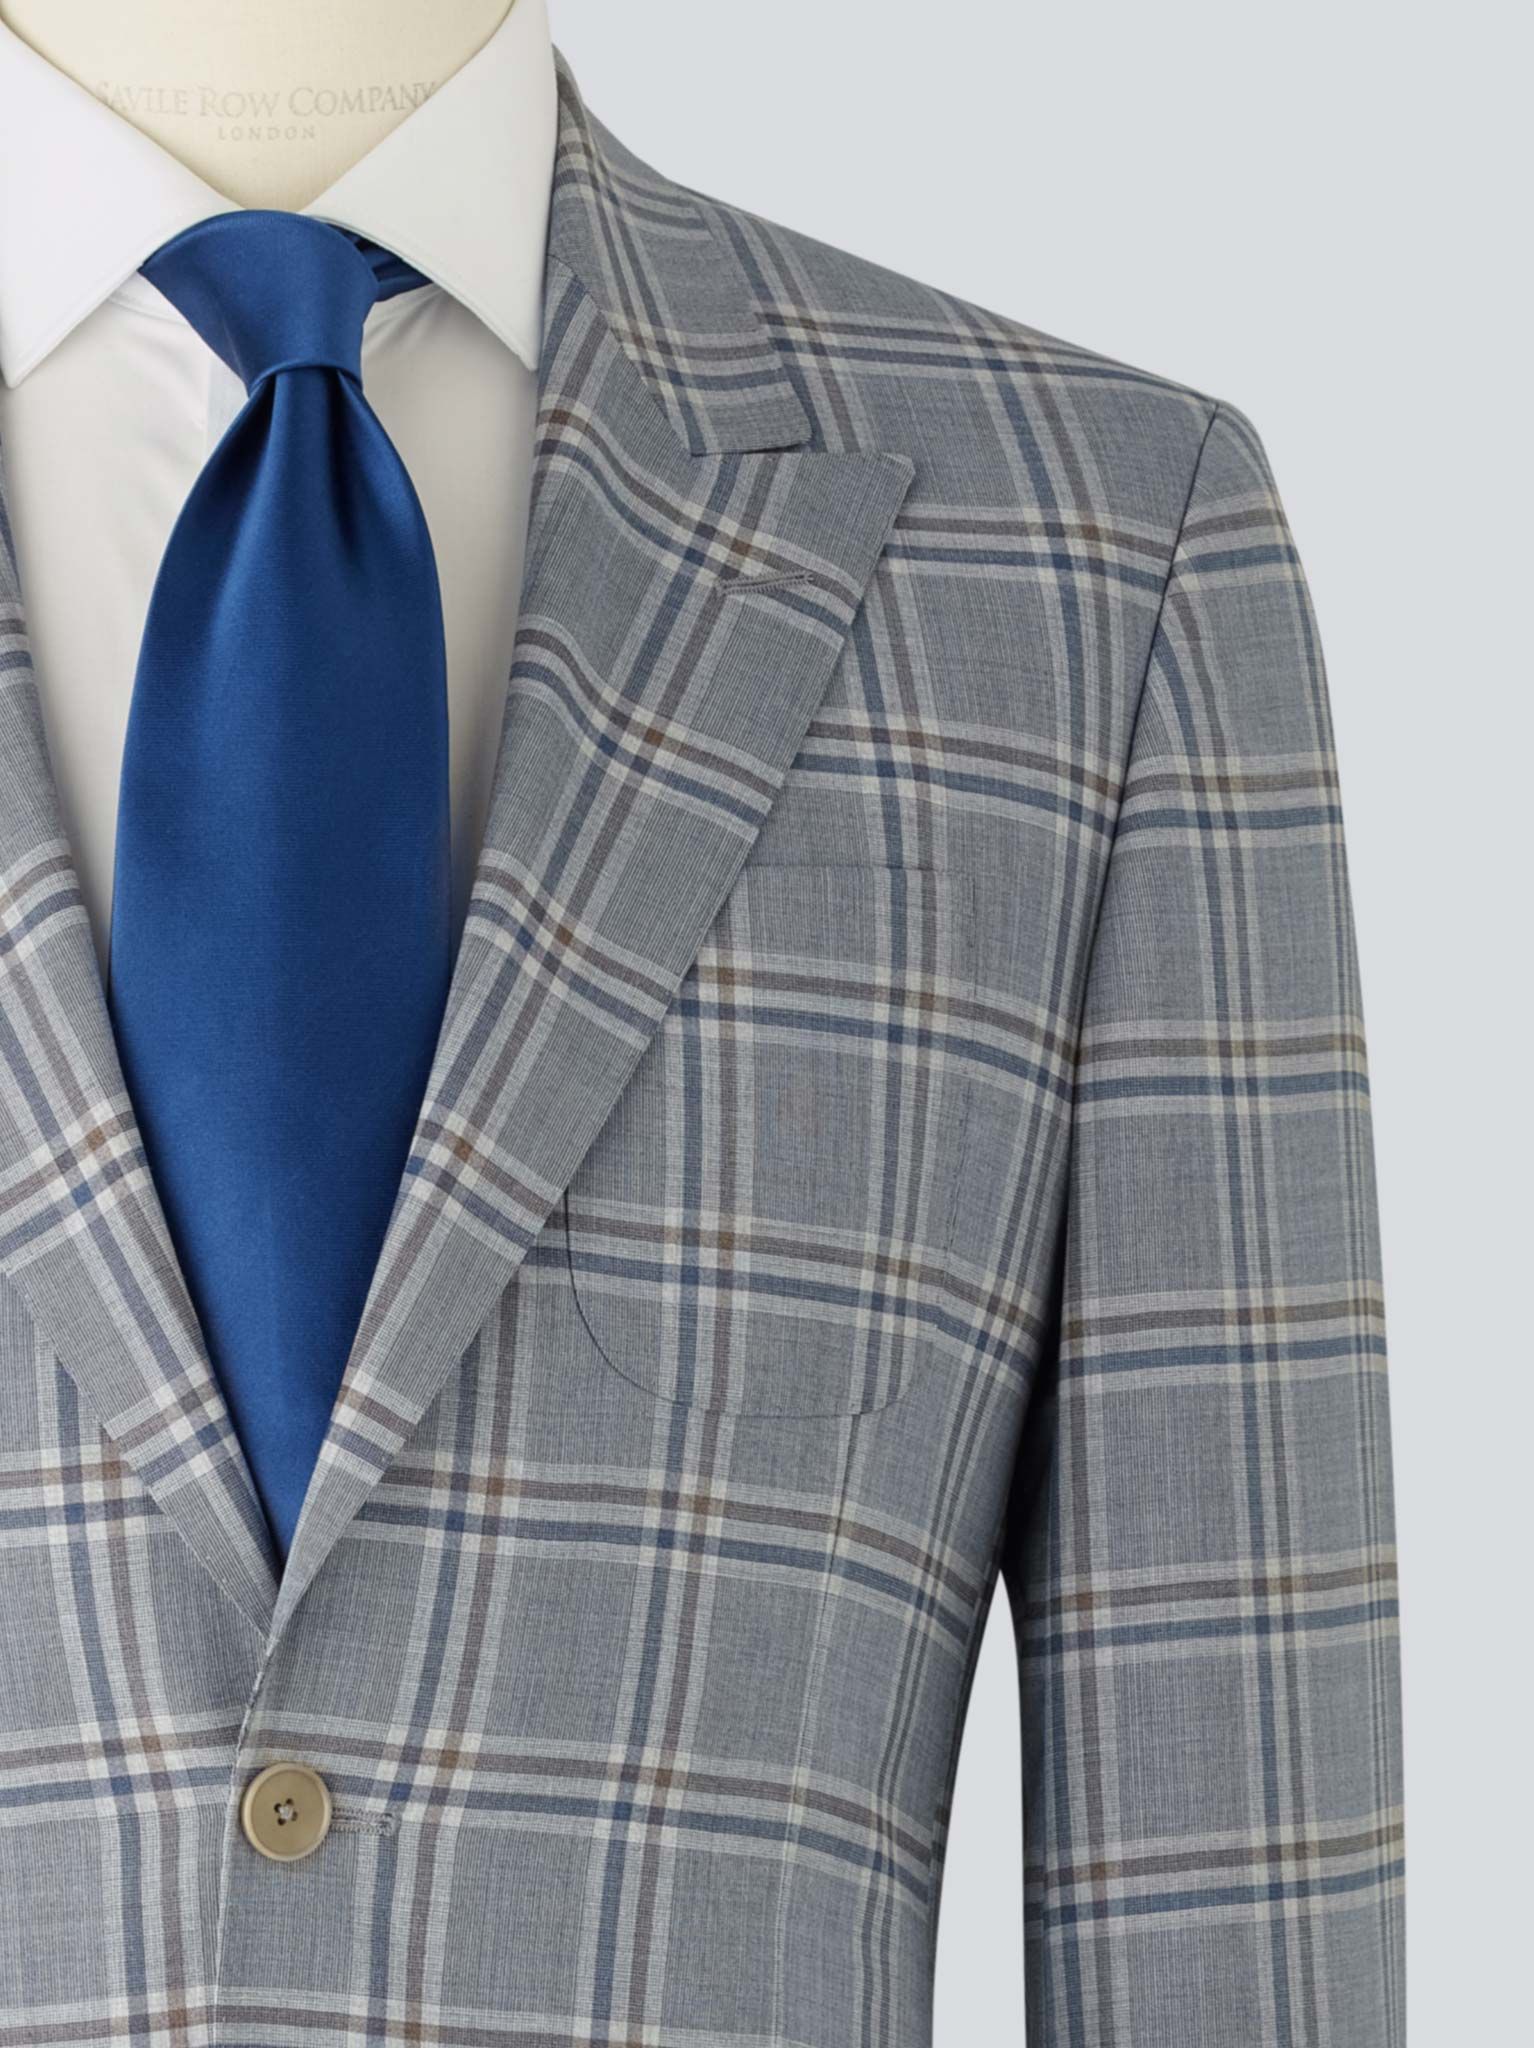 Men’s Tailored Jacket in Pale Blue Check | Savile Row Co